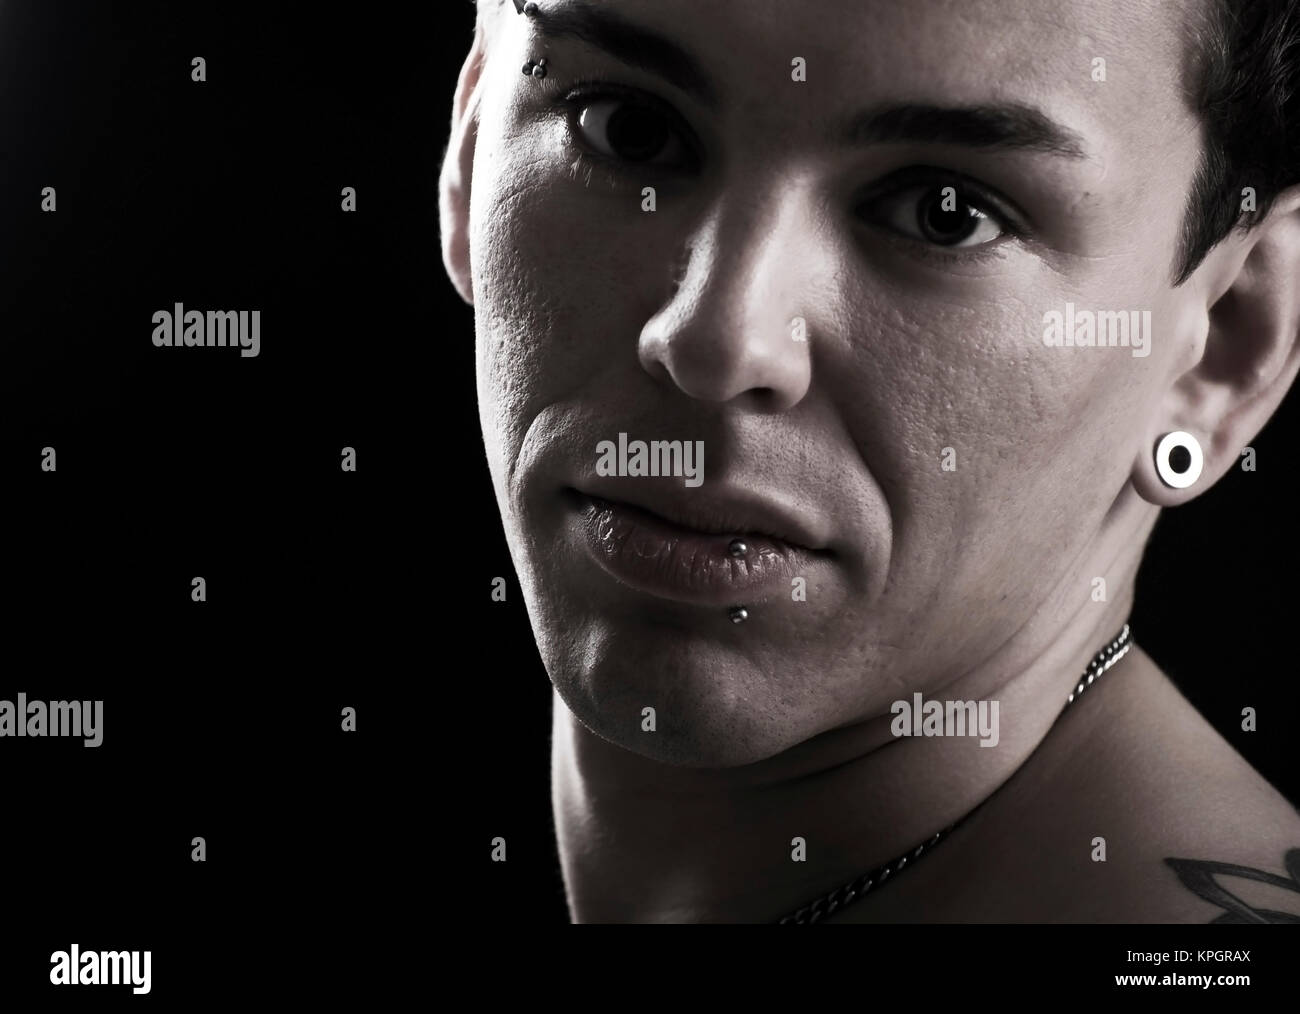 Model released , Junger Mann, 27, mit Gesichtspiercings - man with face piercings Stock Photo